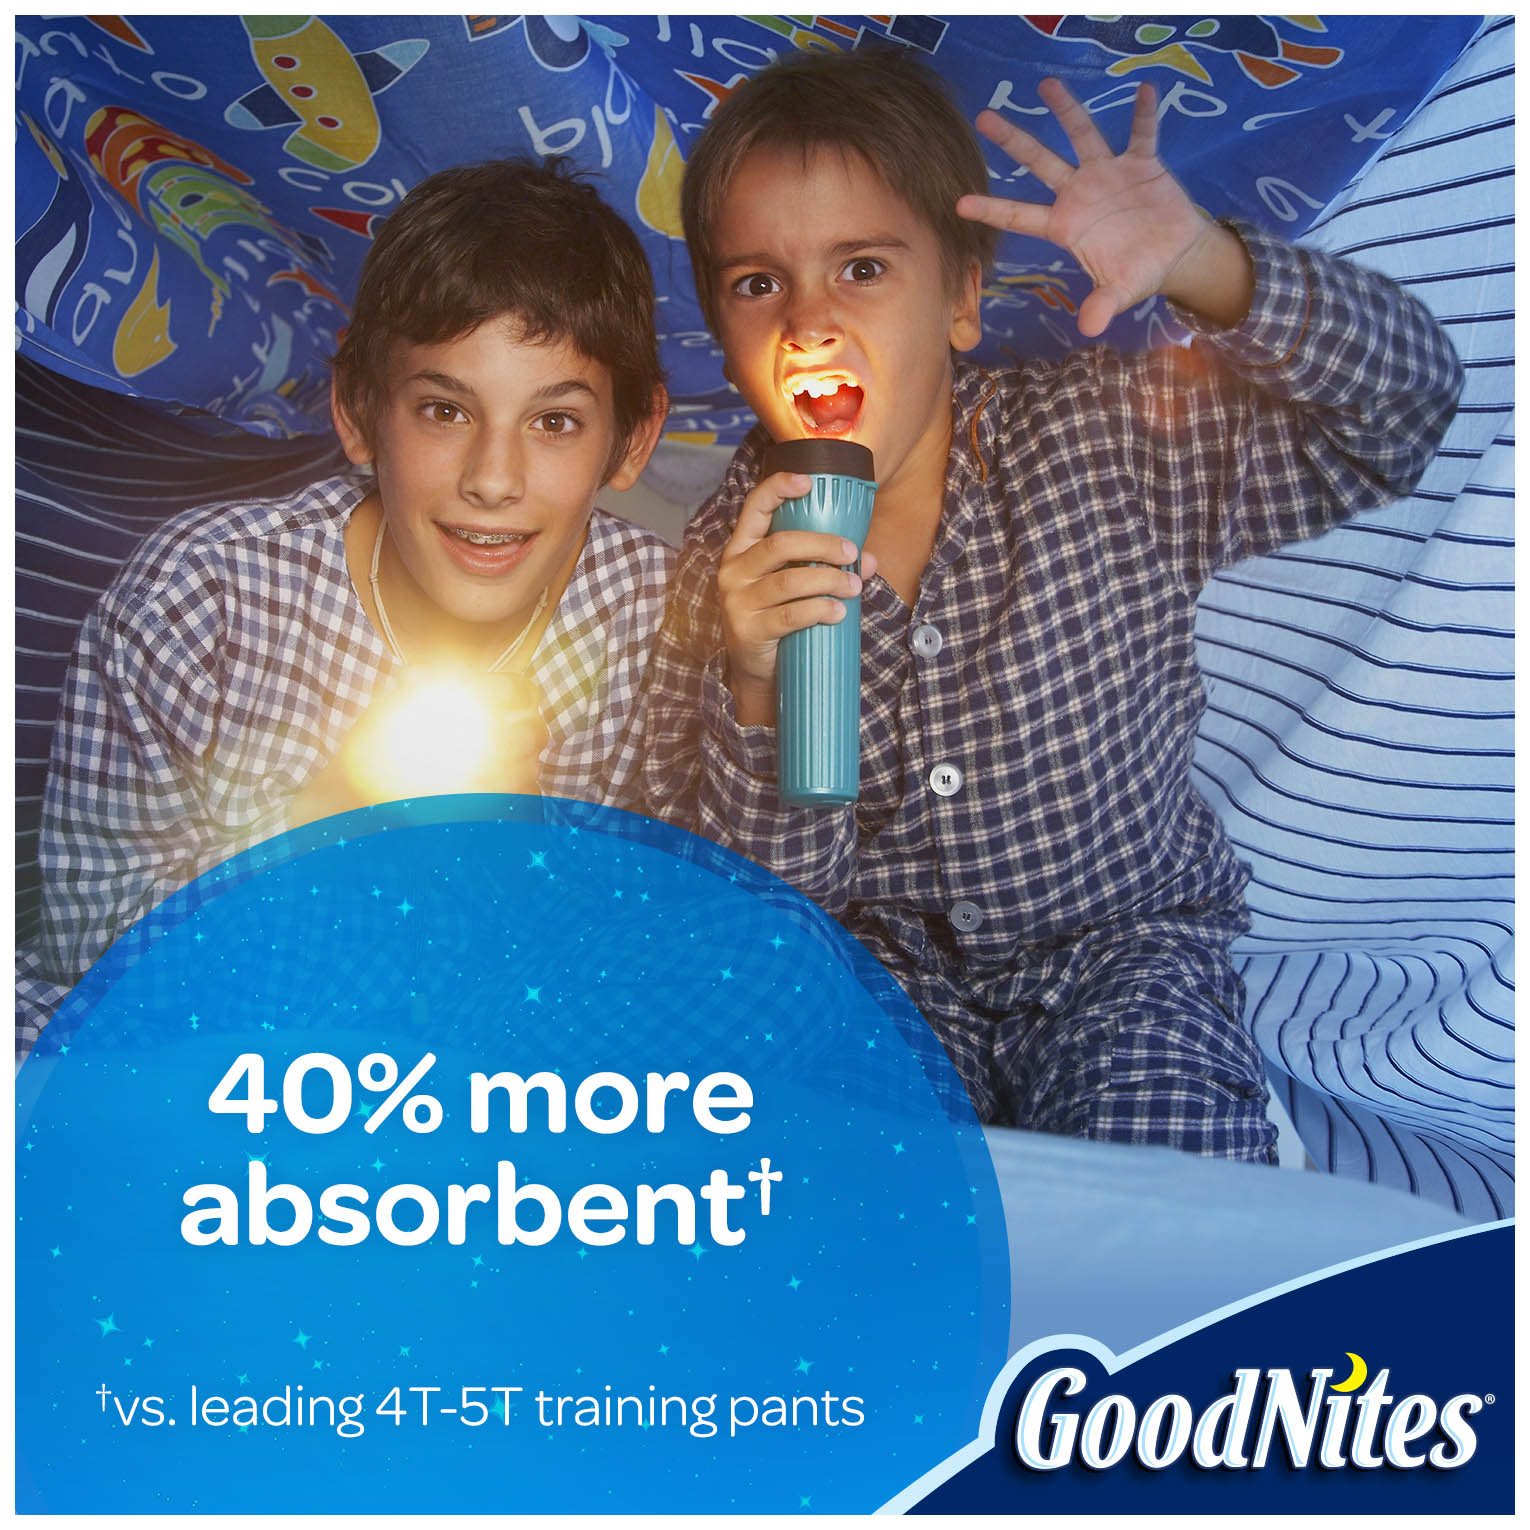 GoodNites Bedtime Bedwetting Underwear for Boys, Size S/M, 33 count - image 3 of 10